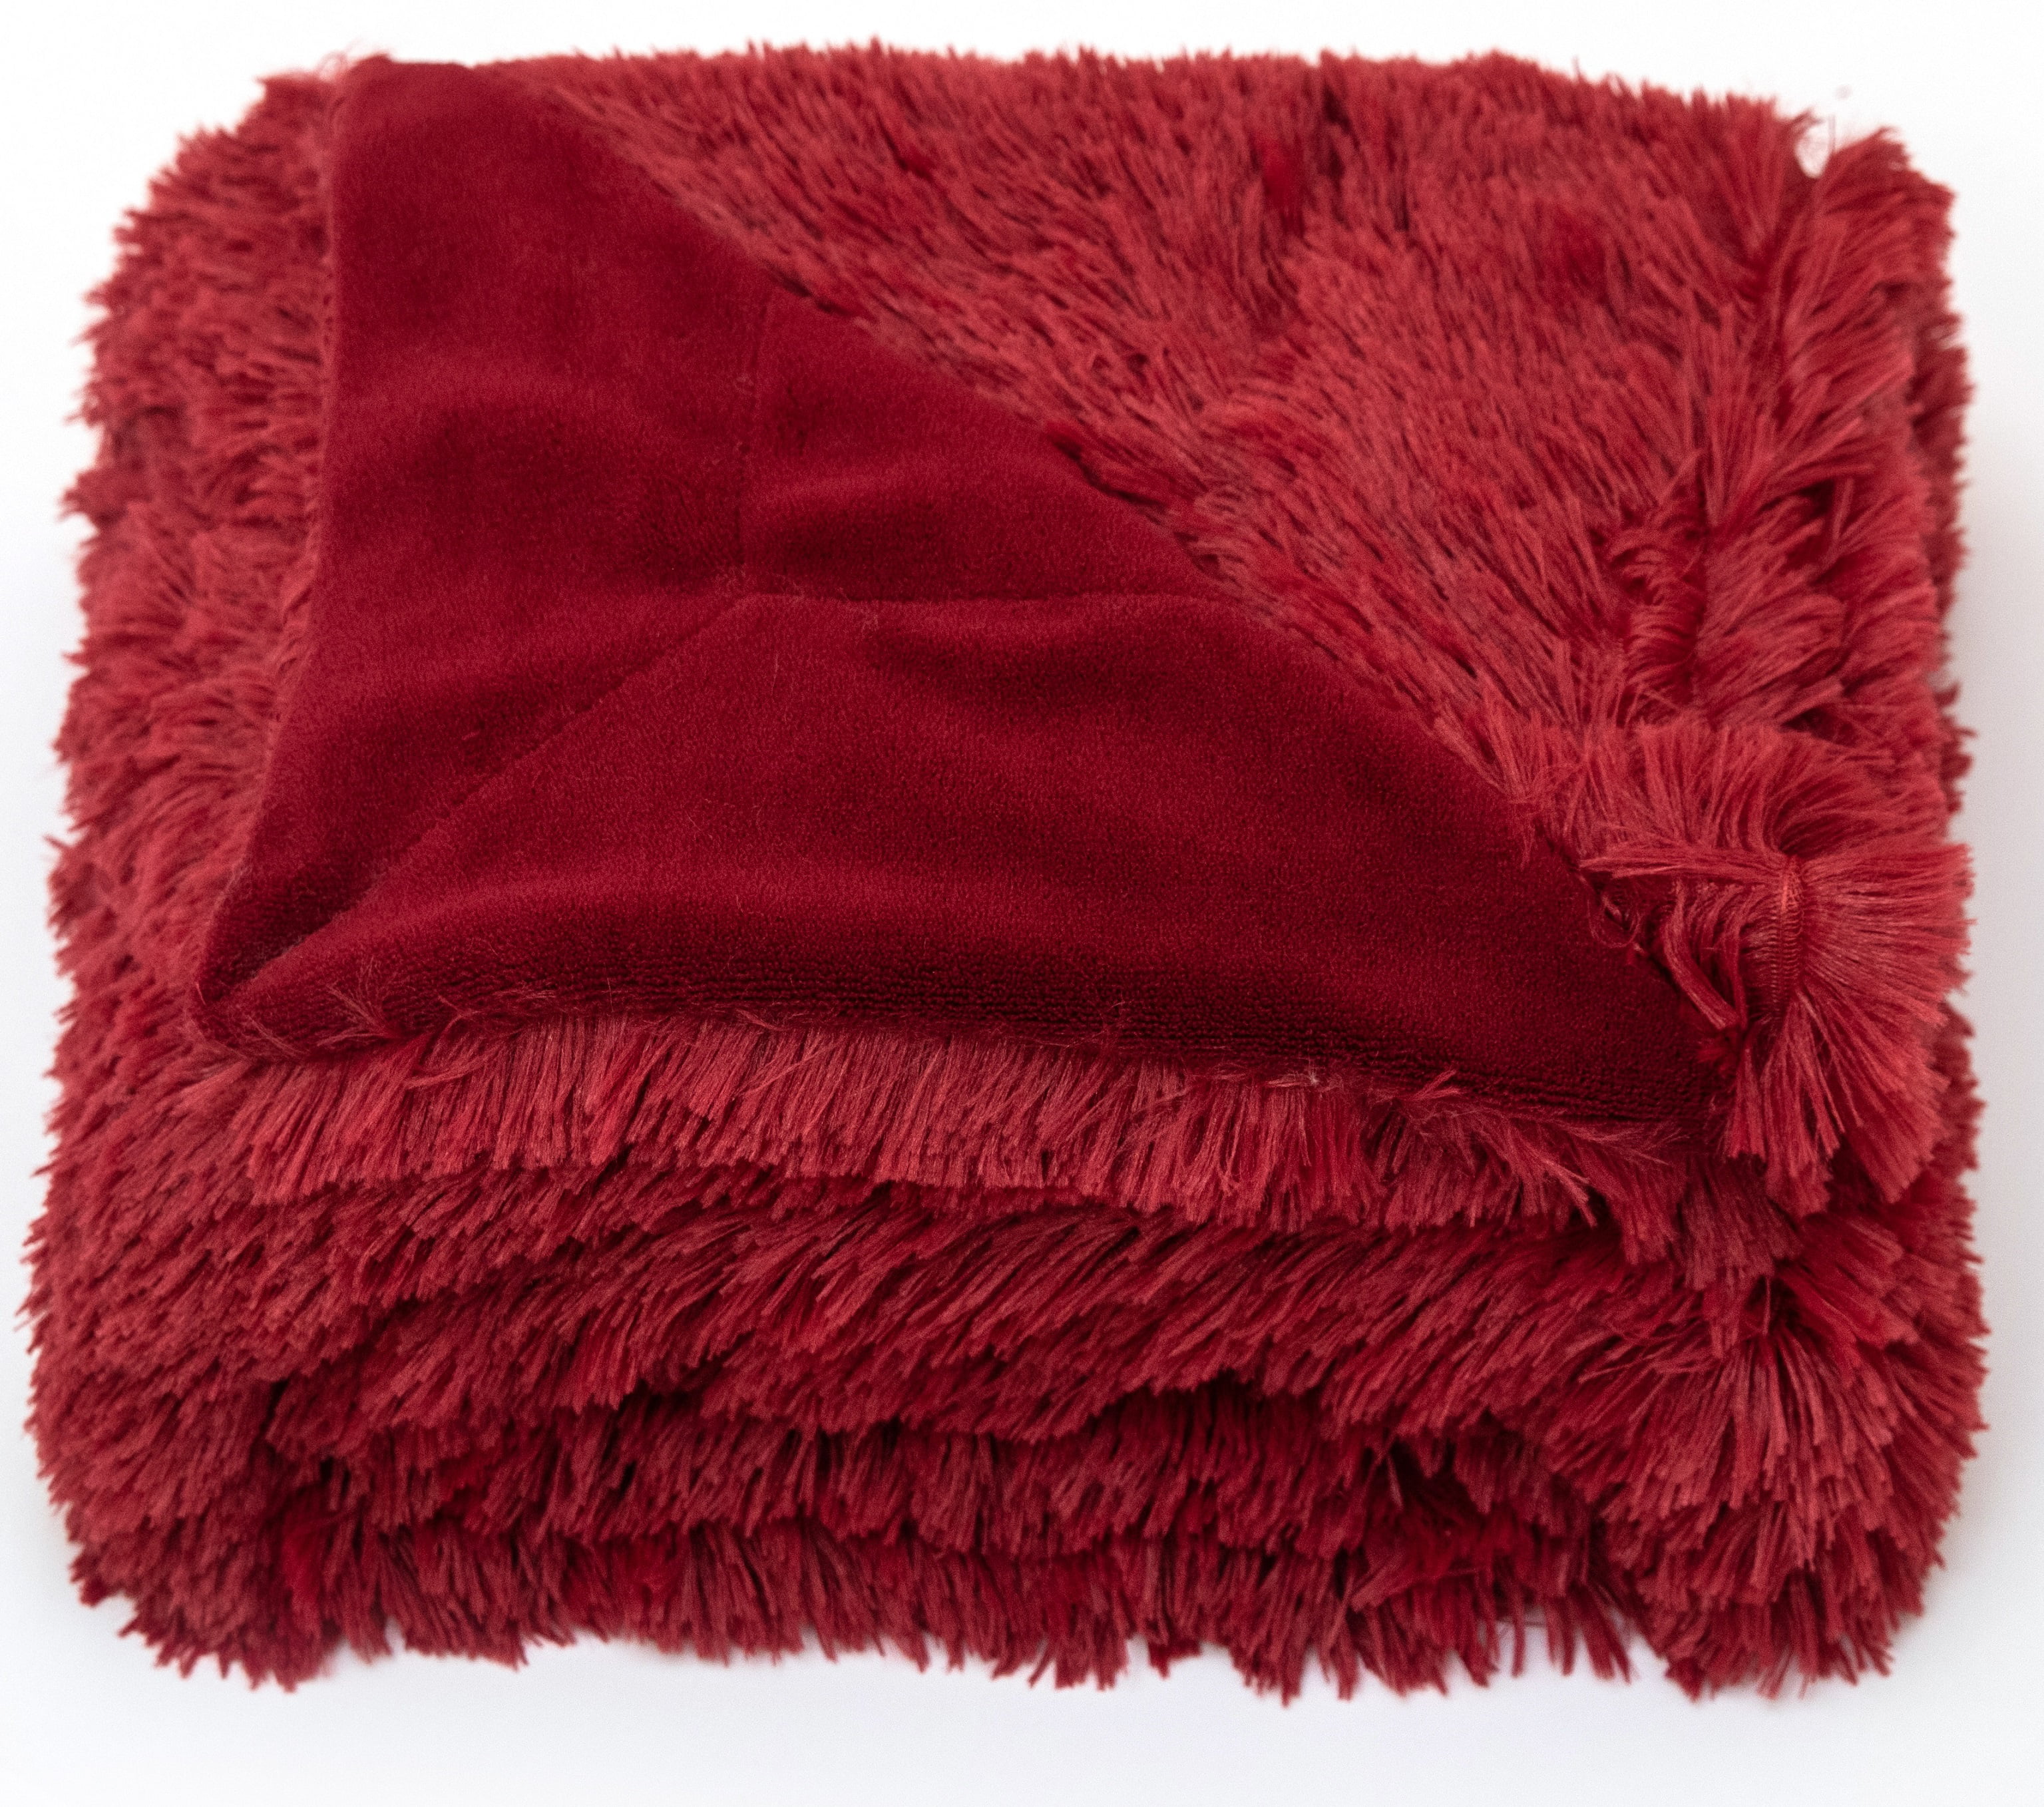 Cheer Collection Set of 2 Shaggy Long Hair Plush Faux Fur Accent Pillows -  18 x 18 inches, 1 - King Soopers